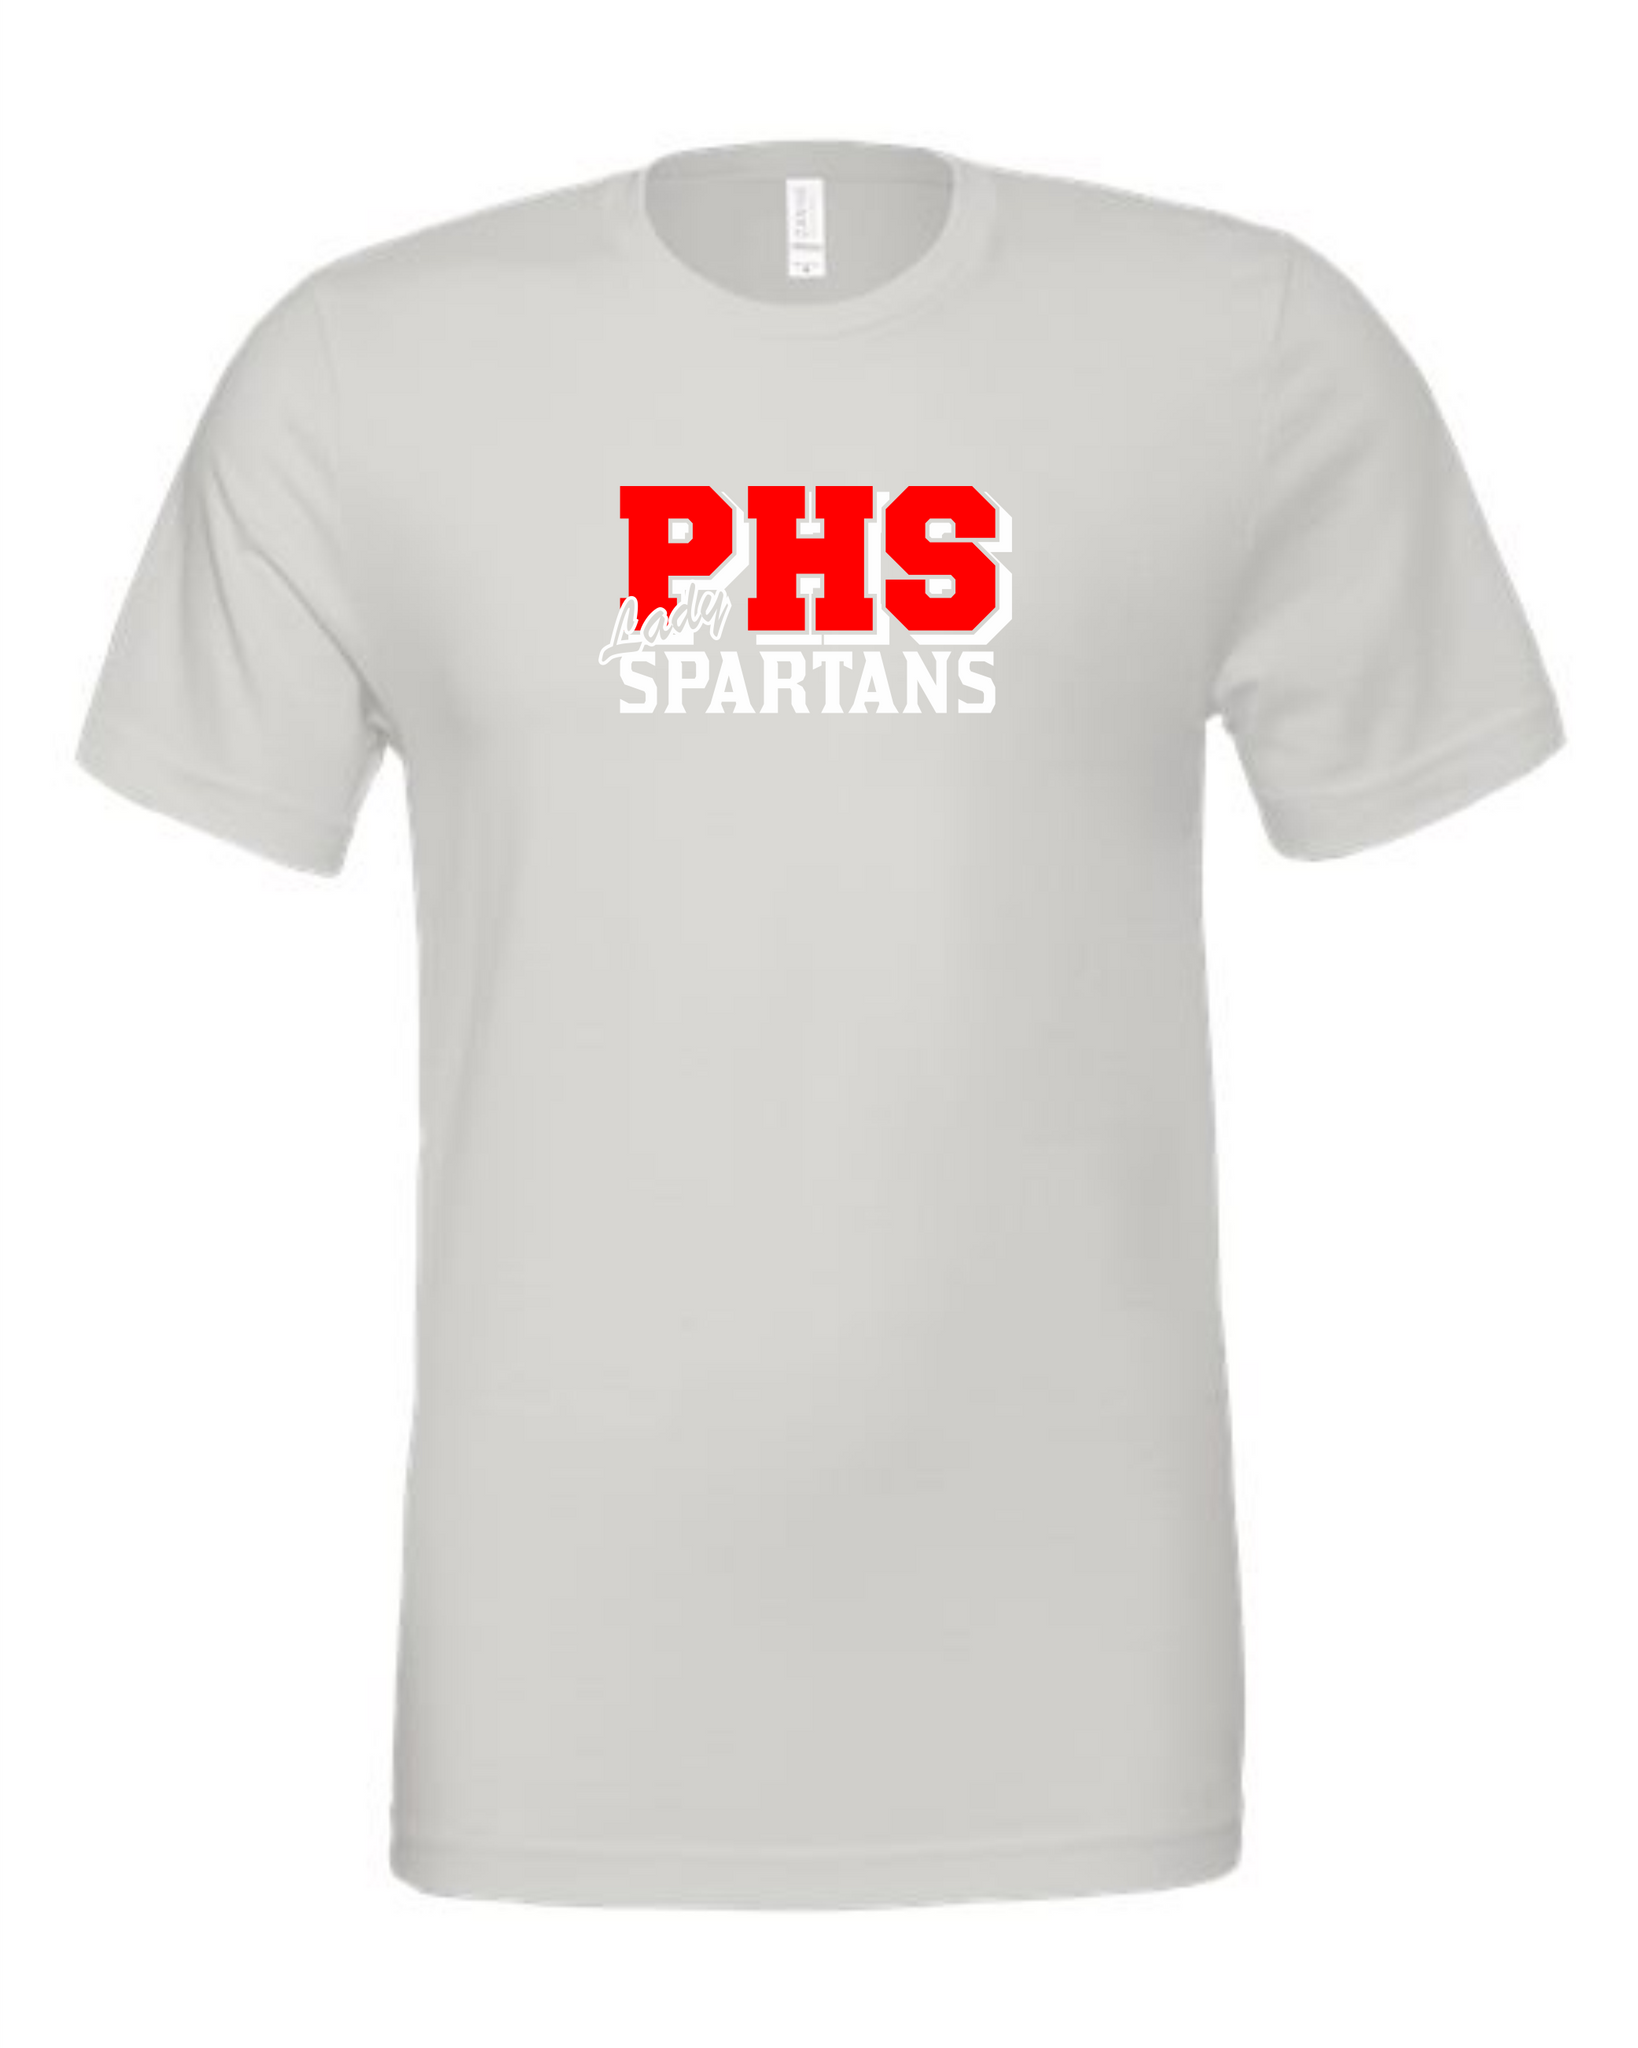 PHS Lady Spartans